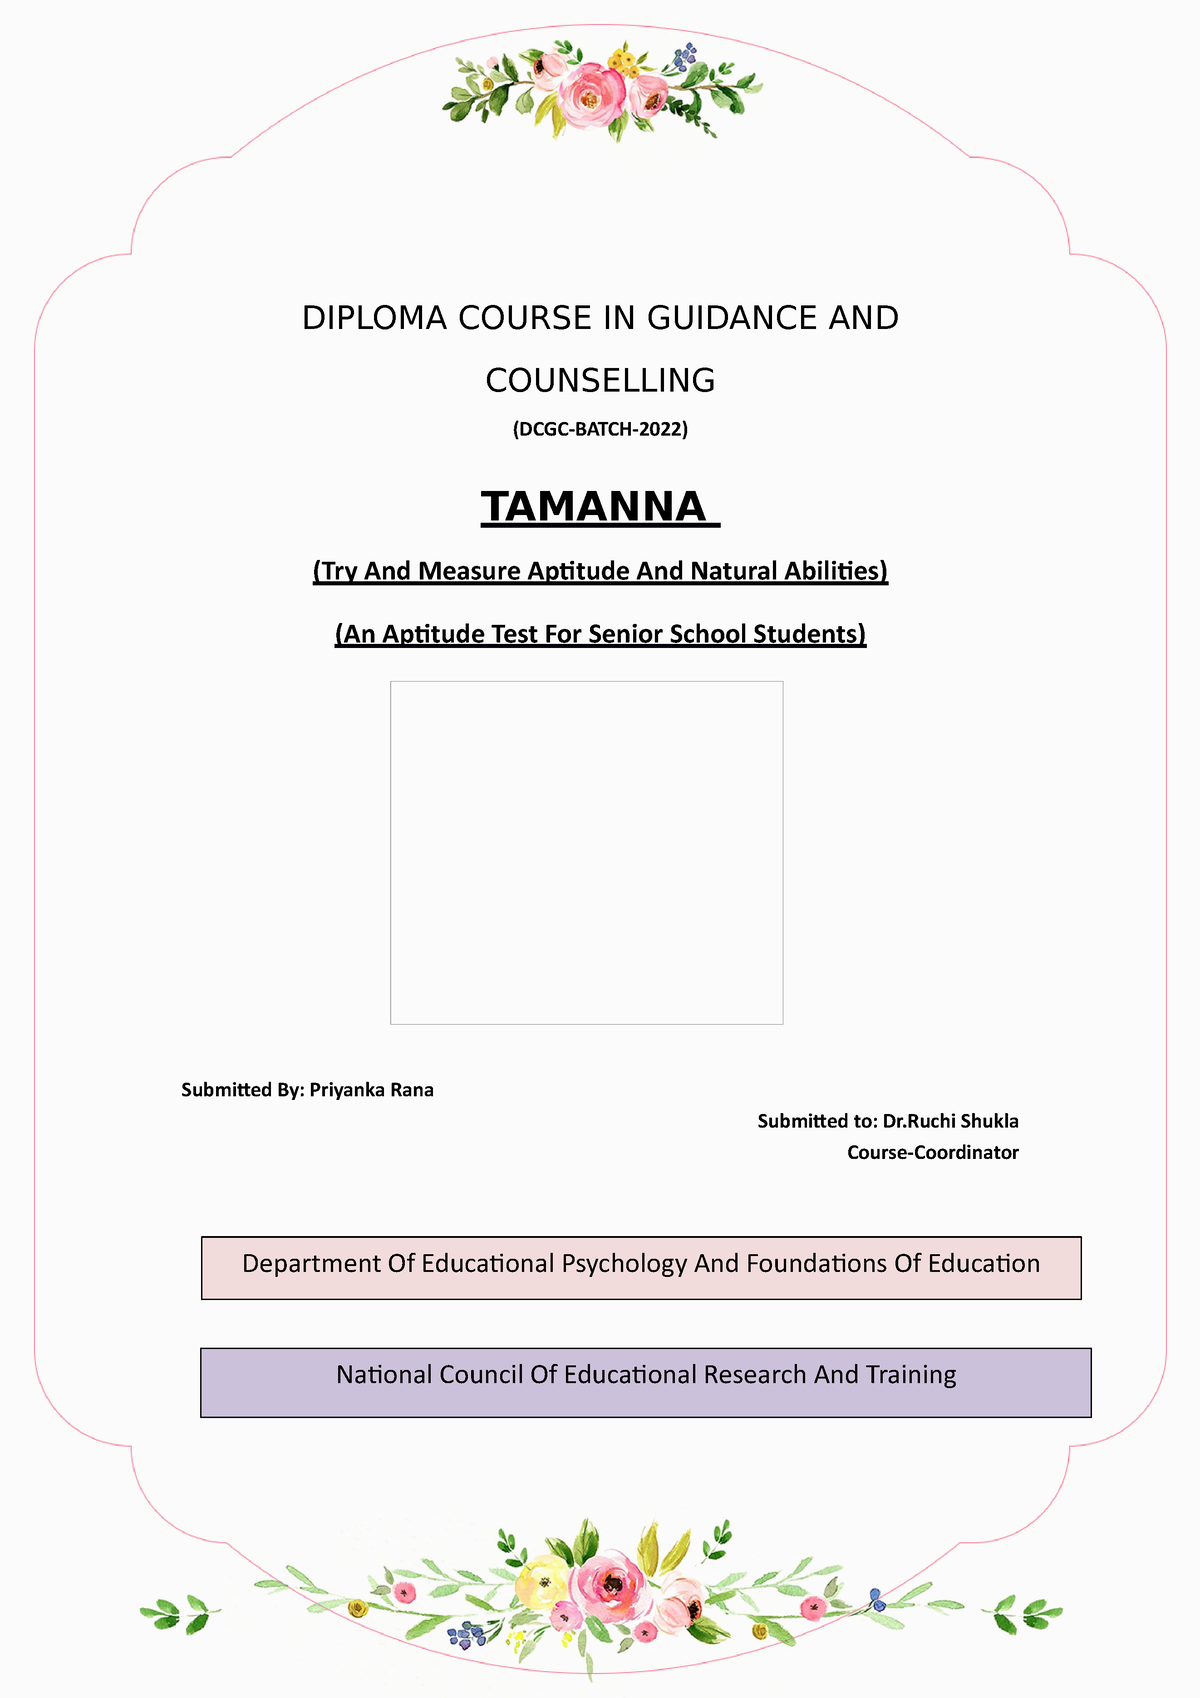 tamanna-test-of-apttitude-diploma-course-in-guidance-and-counselling-dcgc-batch-2022